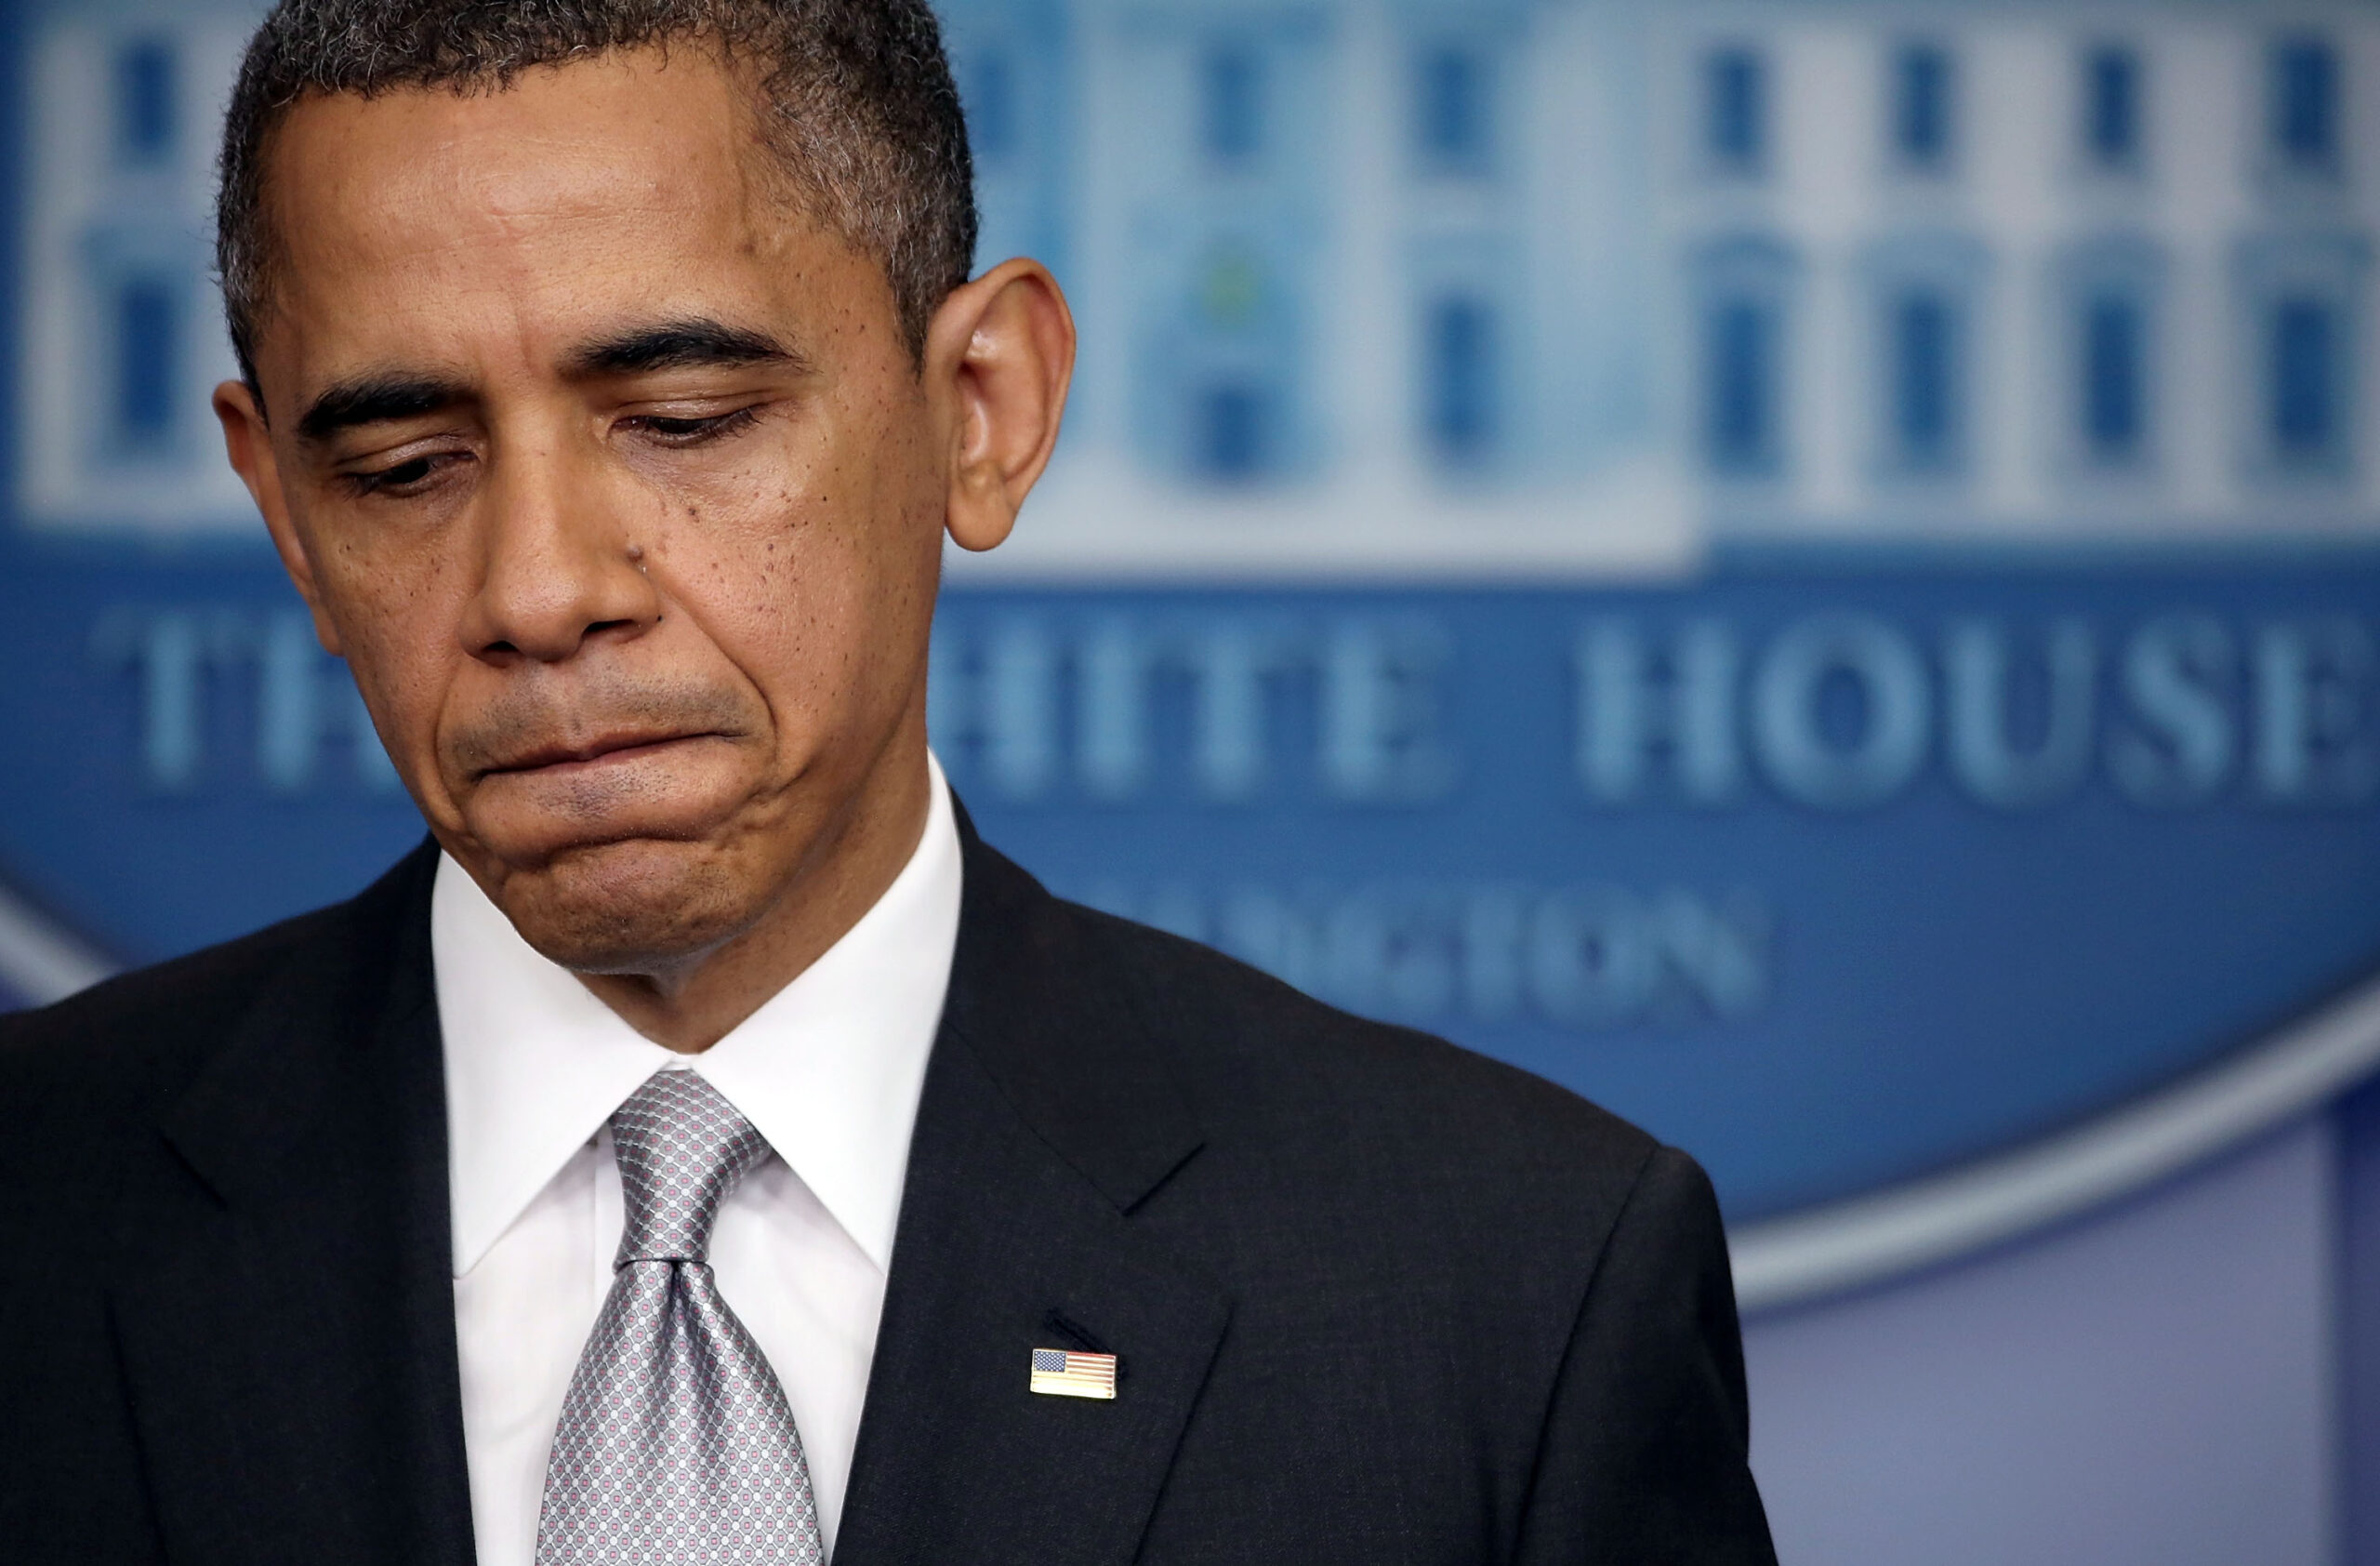 Watch Pres. Obama React to Yet Another School Shooting